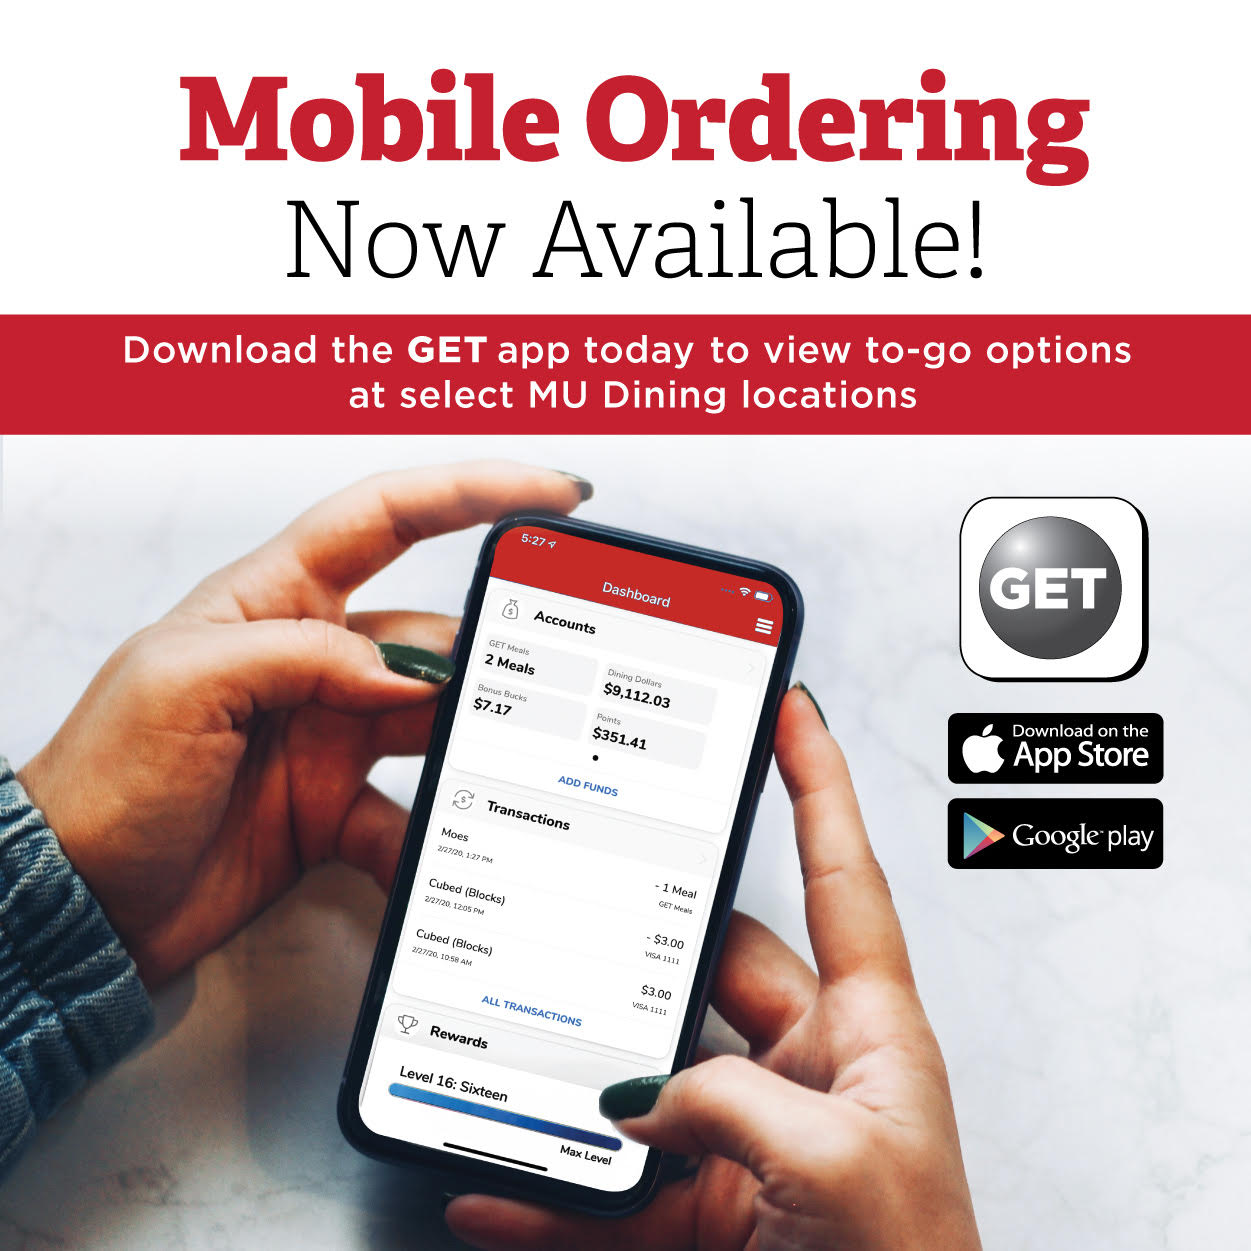 Mobile ordering now available. Download the GET app today. To view to go options at select Miami dining locations.